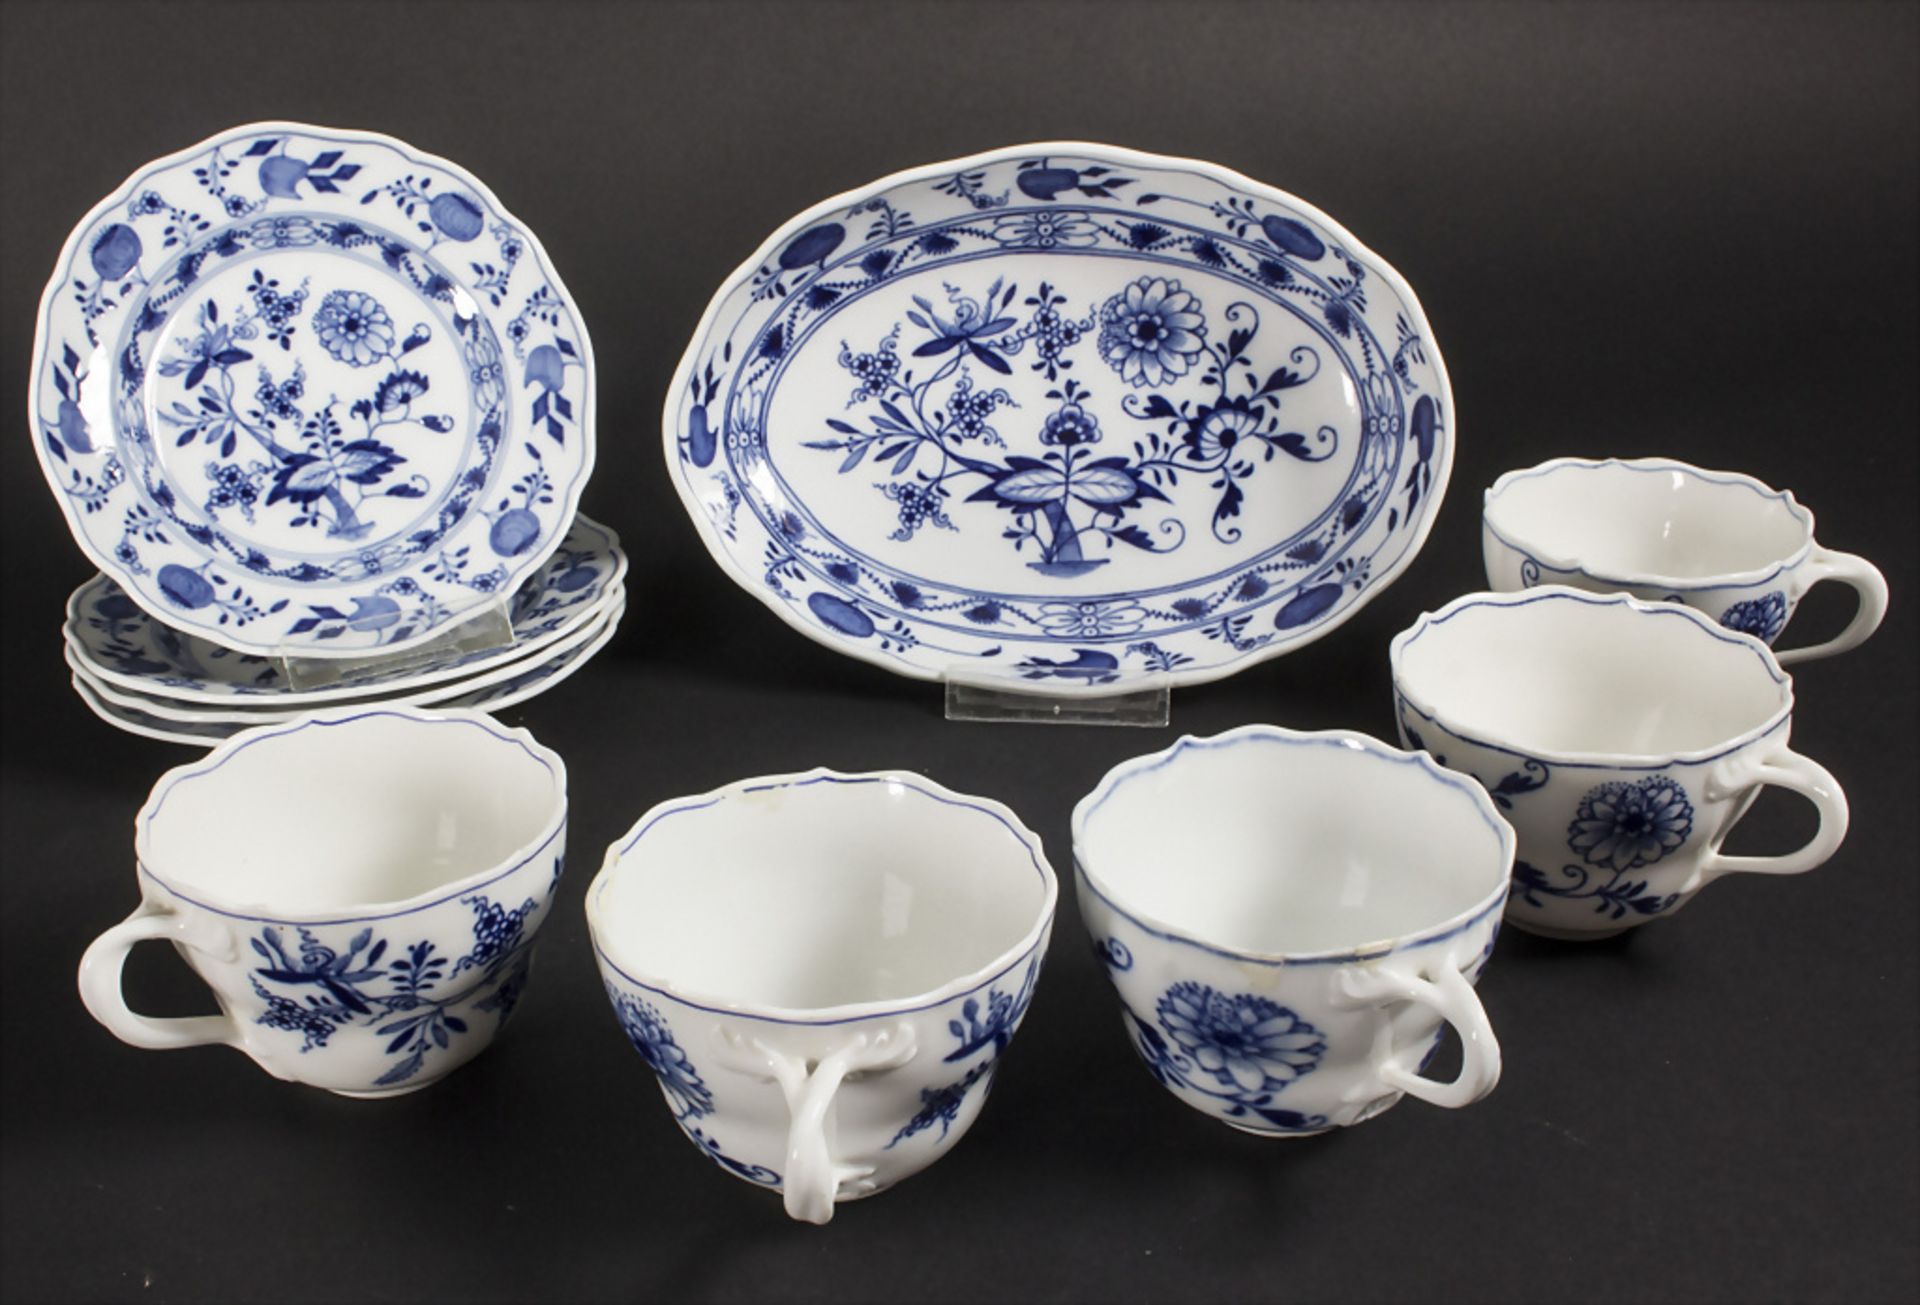 Restservice Zwiebelmuster / A set of 10 pieces with onion pattern, Meissen, 19-20 Jh.